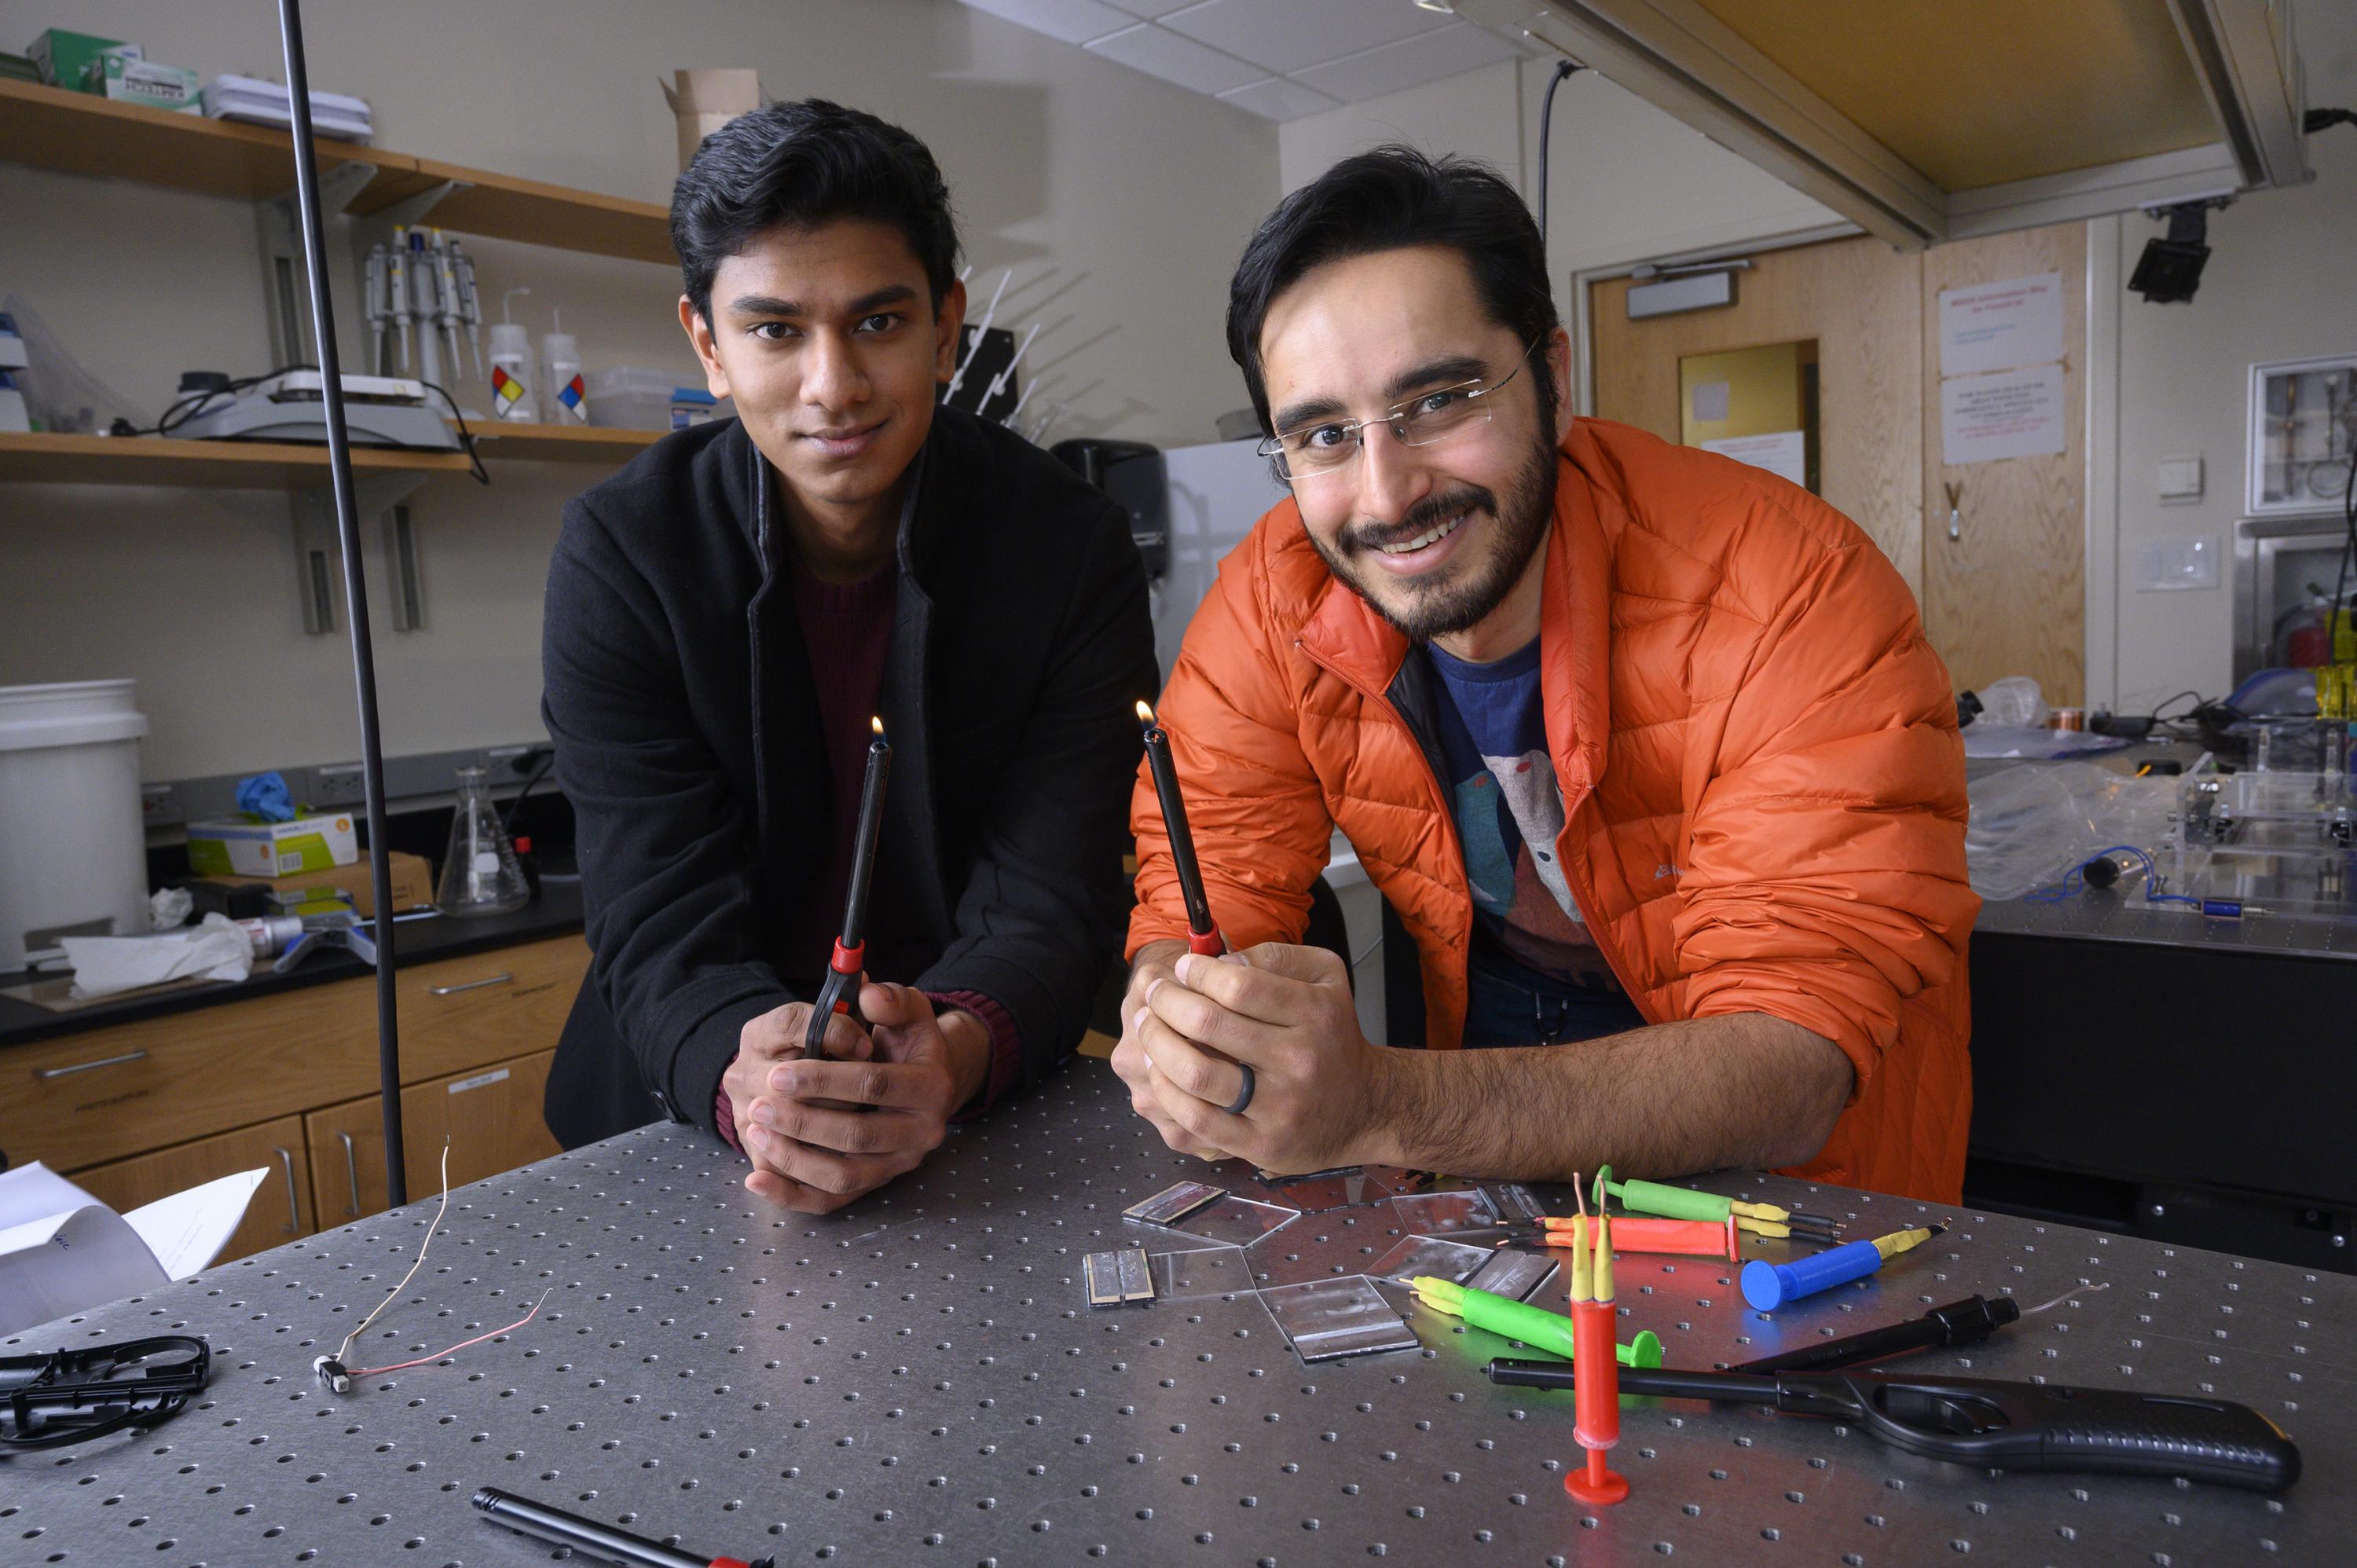 Newswise: Scientists Transform a BBQ Lighter Into a High-Tech Lab Device